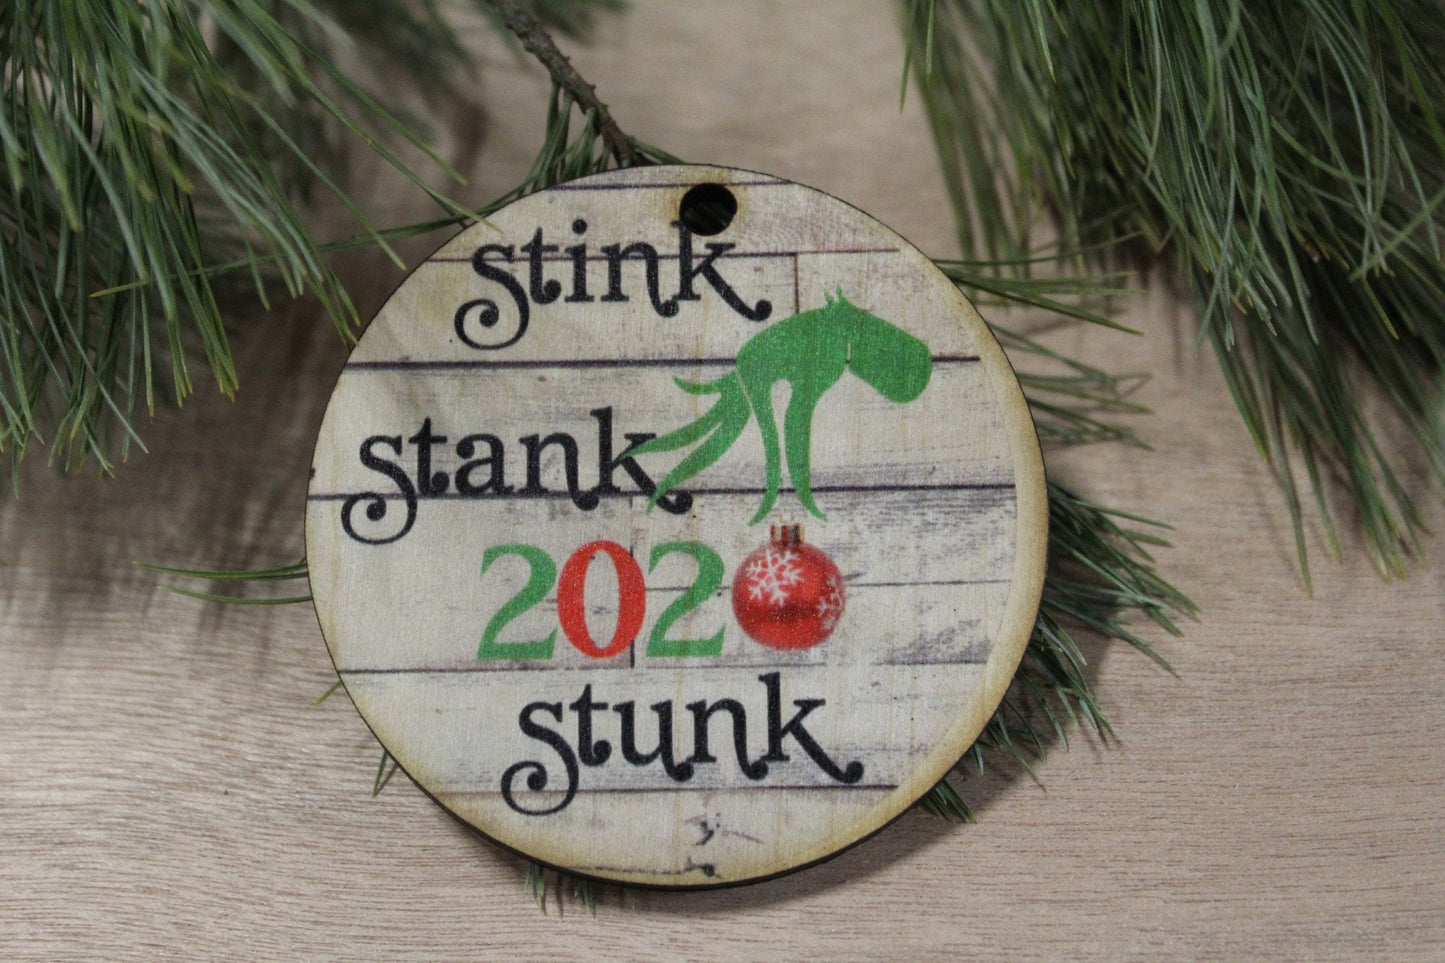 Set of 3 Stink Stank Stunk Ornament 2020 With Date Grouch Christmas Keychain Décor Wood Sign Tree Gift Cute Character Hand Green Festive